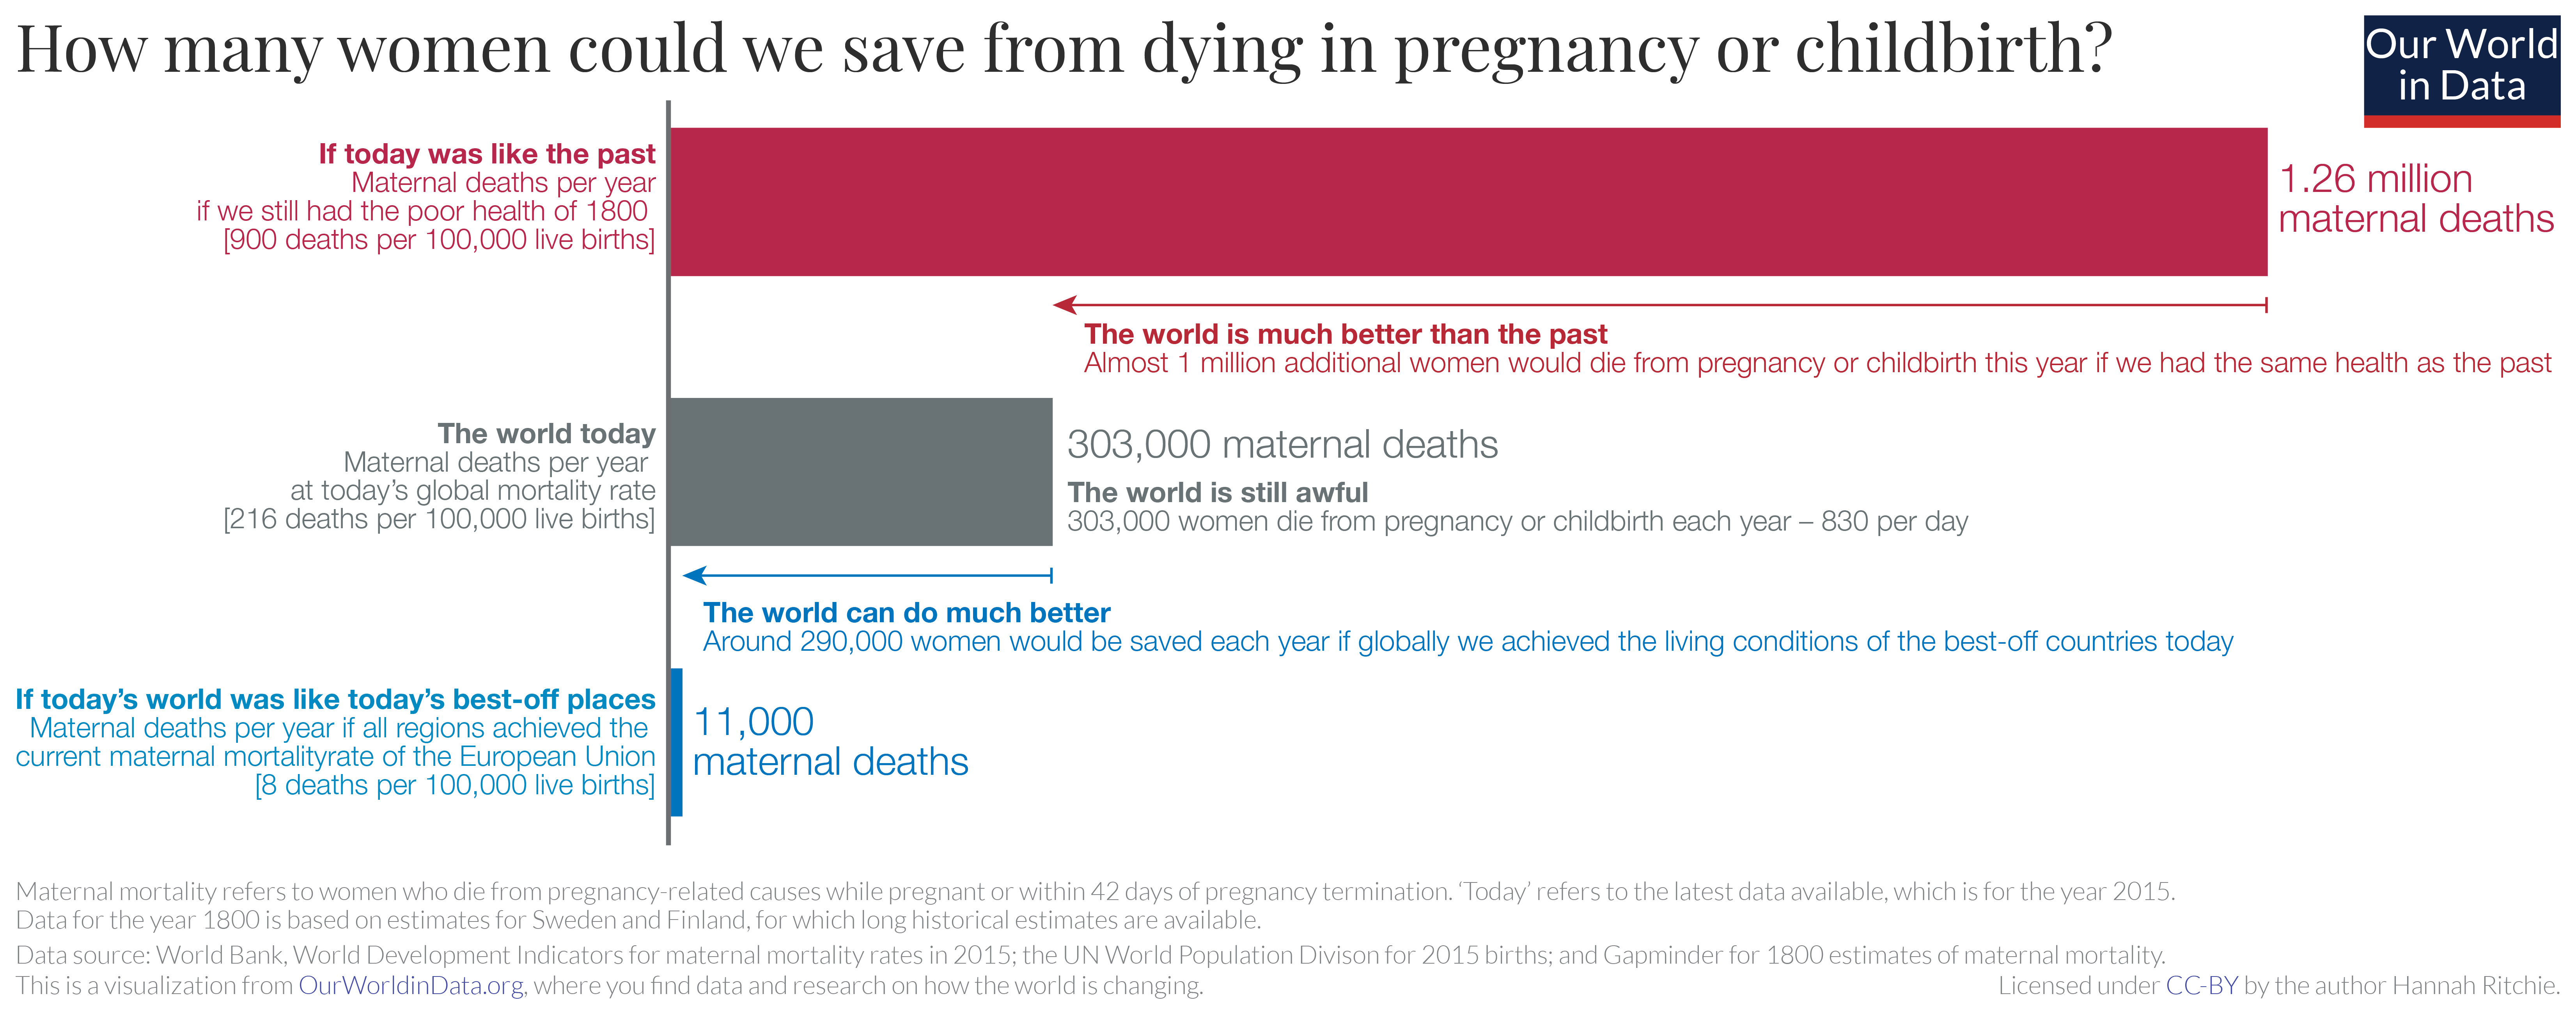 How many people die and how many are born each year? - Our World in Data